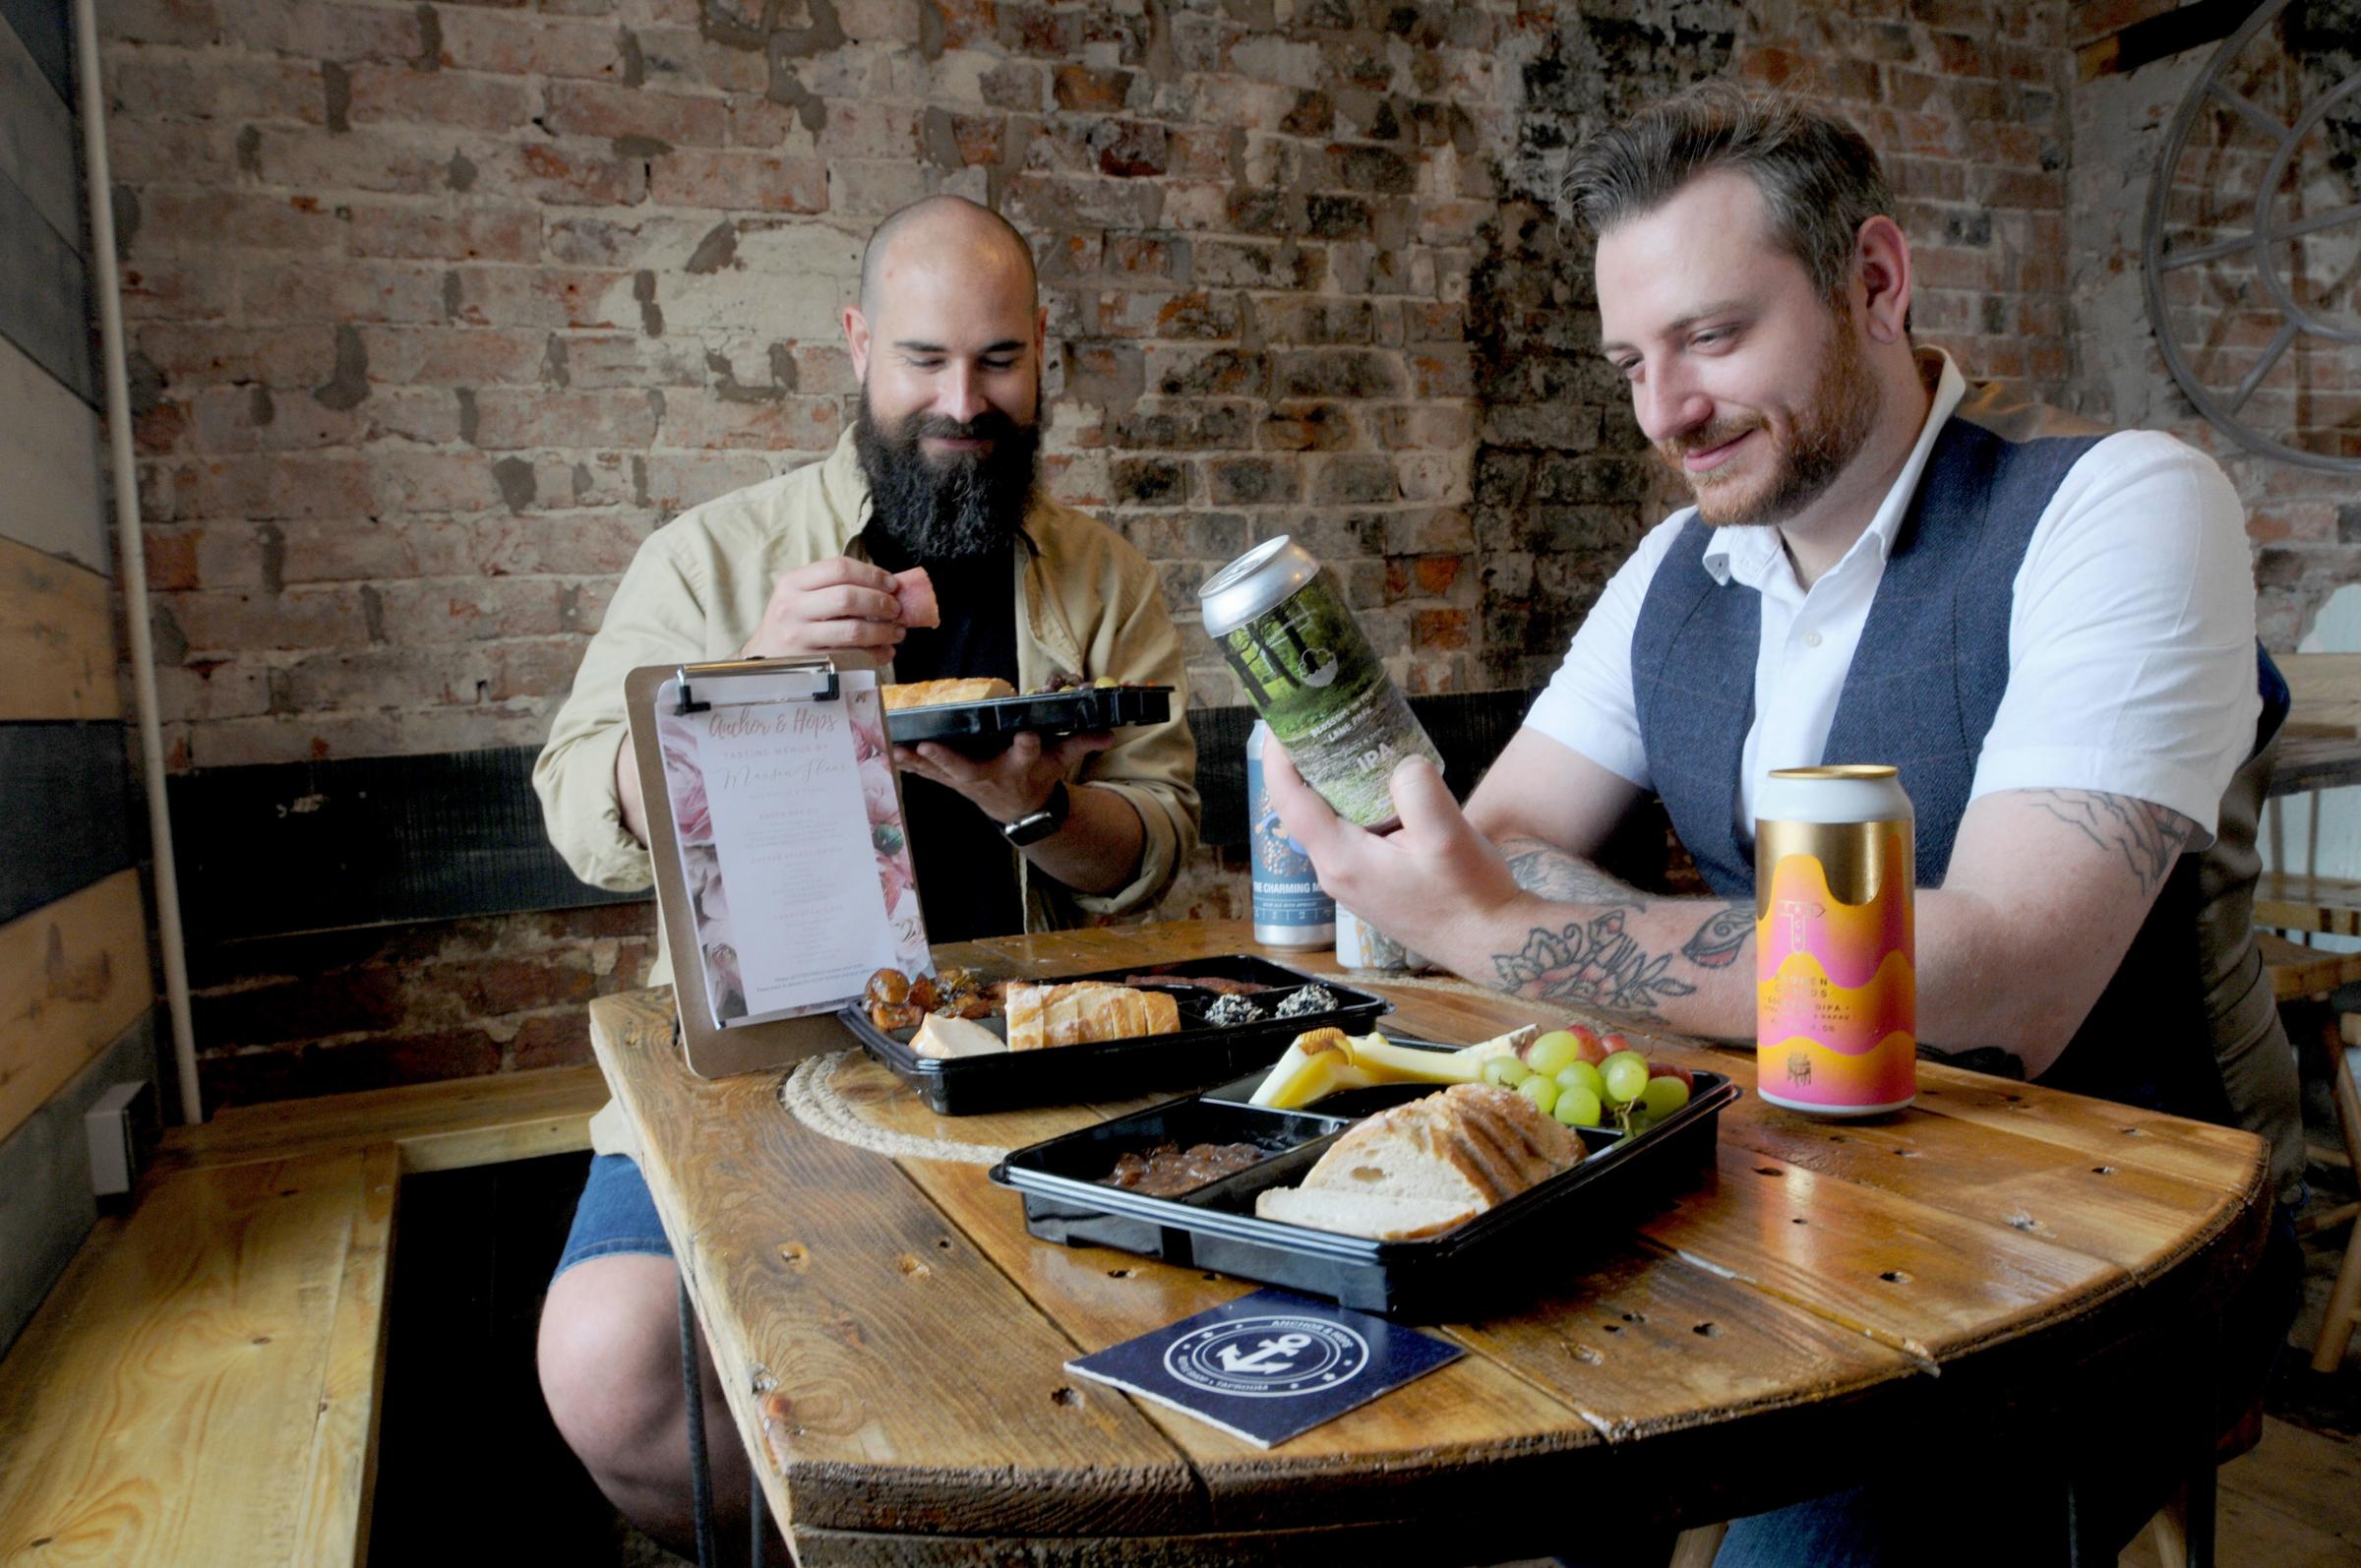 Chris Kelly, from Anchor and Hops, and Nick Gerald, restaurant manager of Maison Fleur